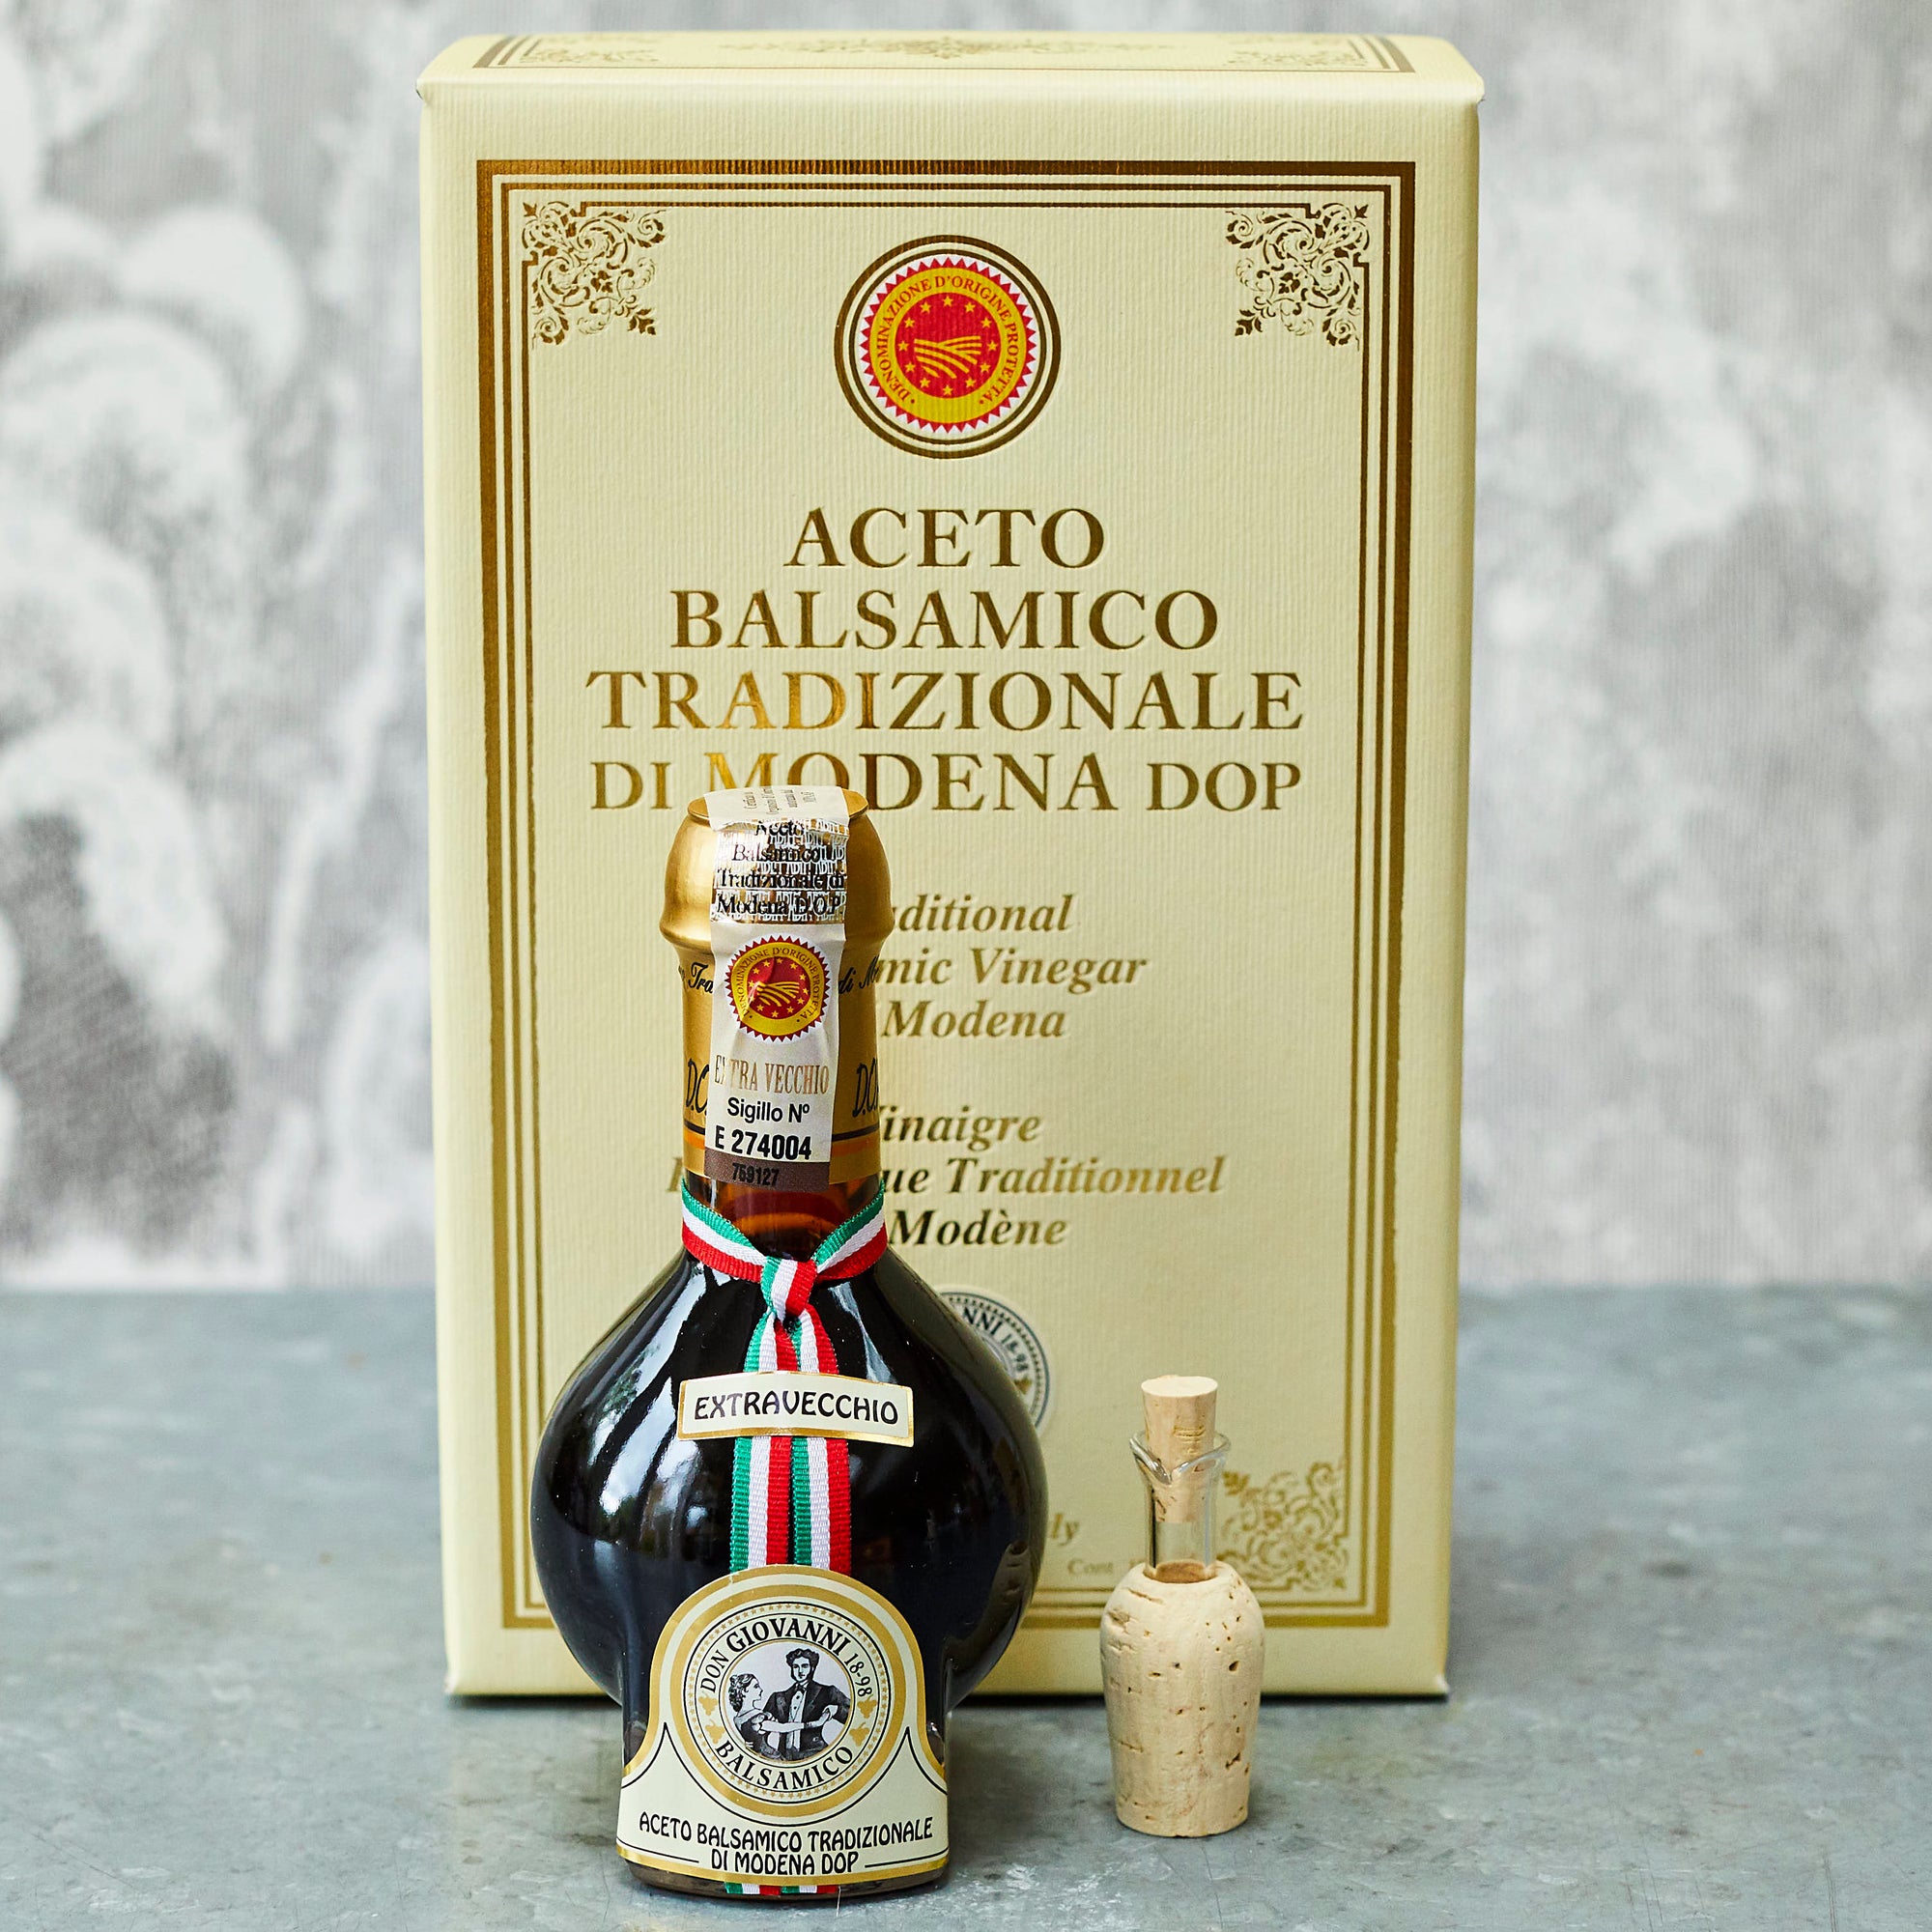 Don Giovanni Traditional Balsamic Vinegar of Modena DOP Extravecchio (25 years) - Vinegar Shed